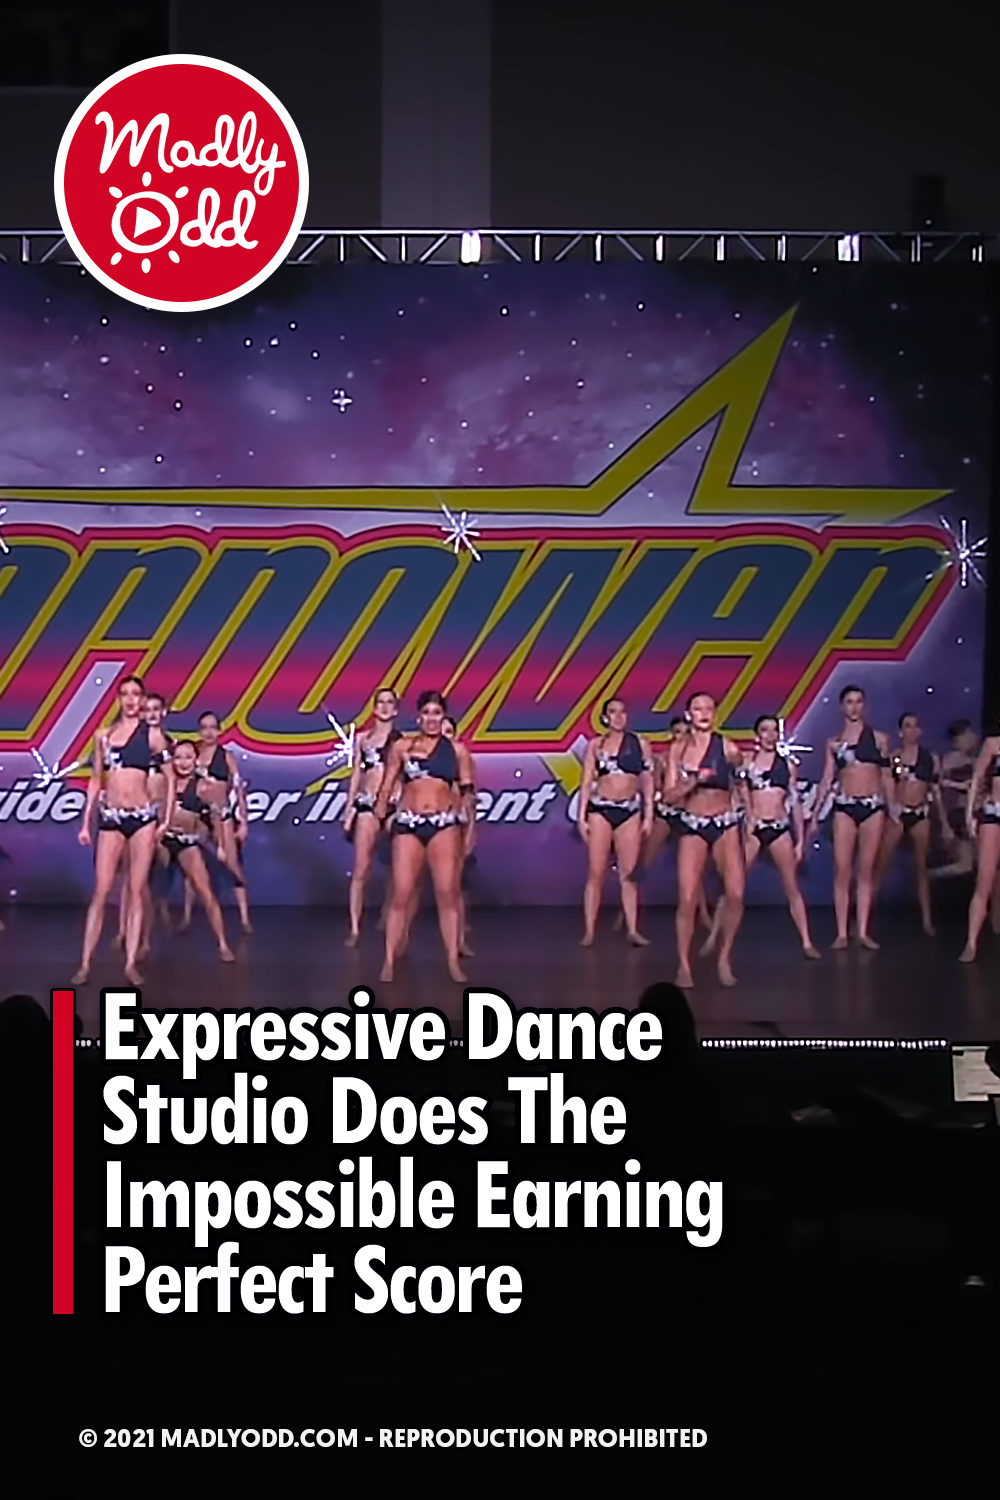 Expressive Dance Studio Does The Impossible Earning Perfect Score